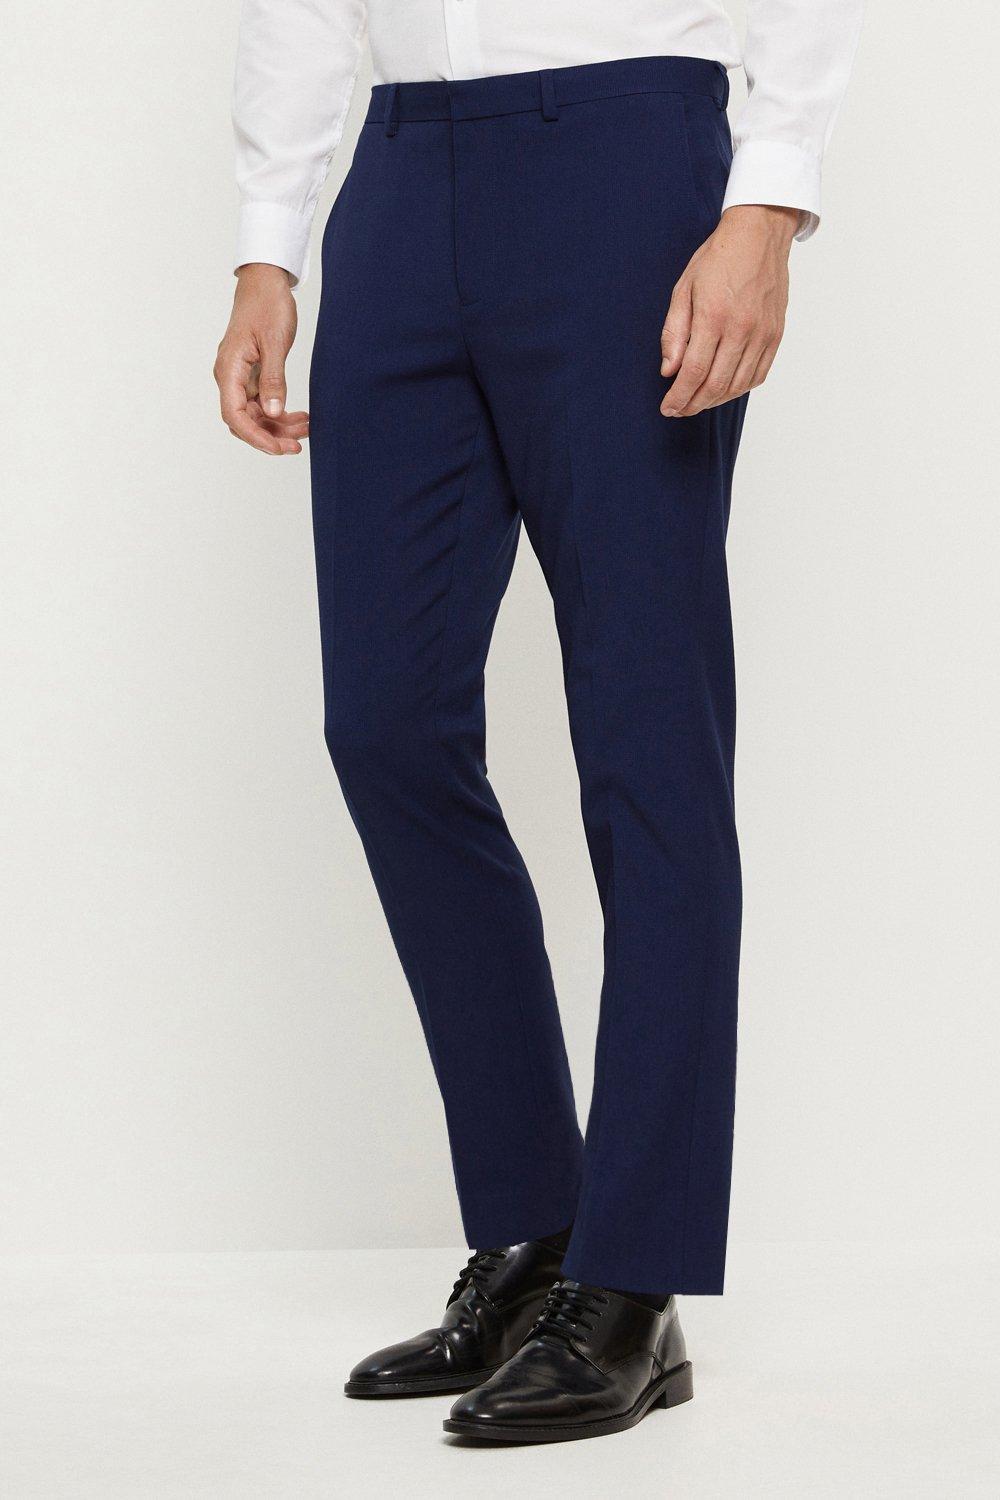 Mens Skinny Fit Navy Textured Suit Trousers